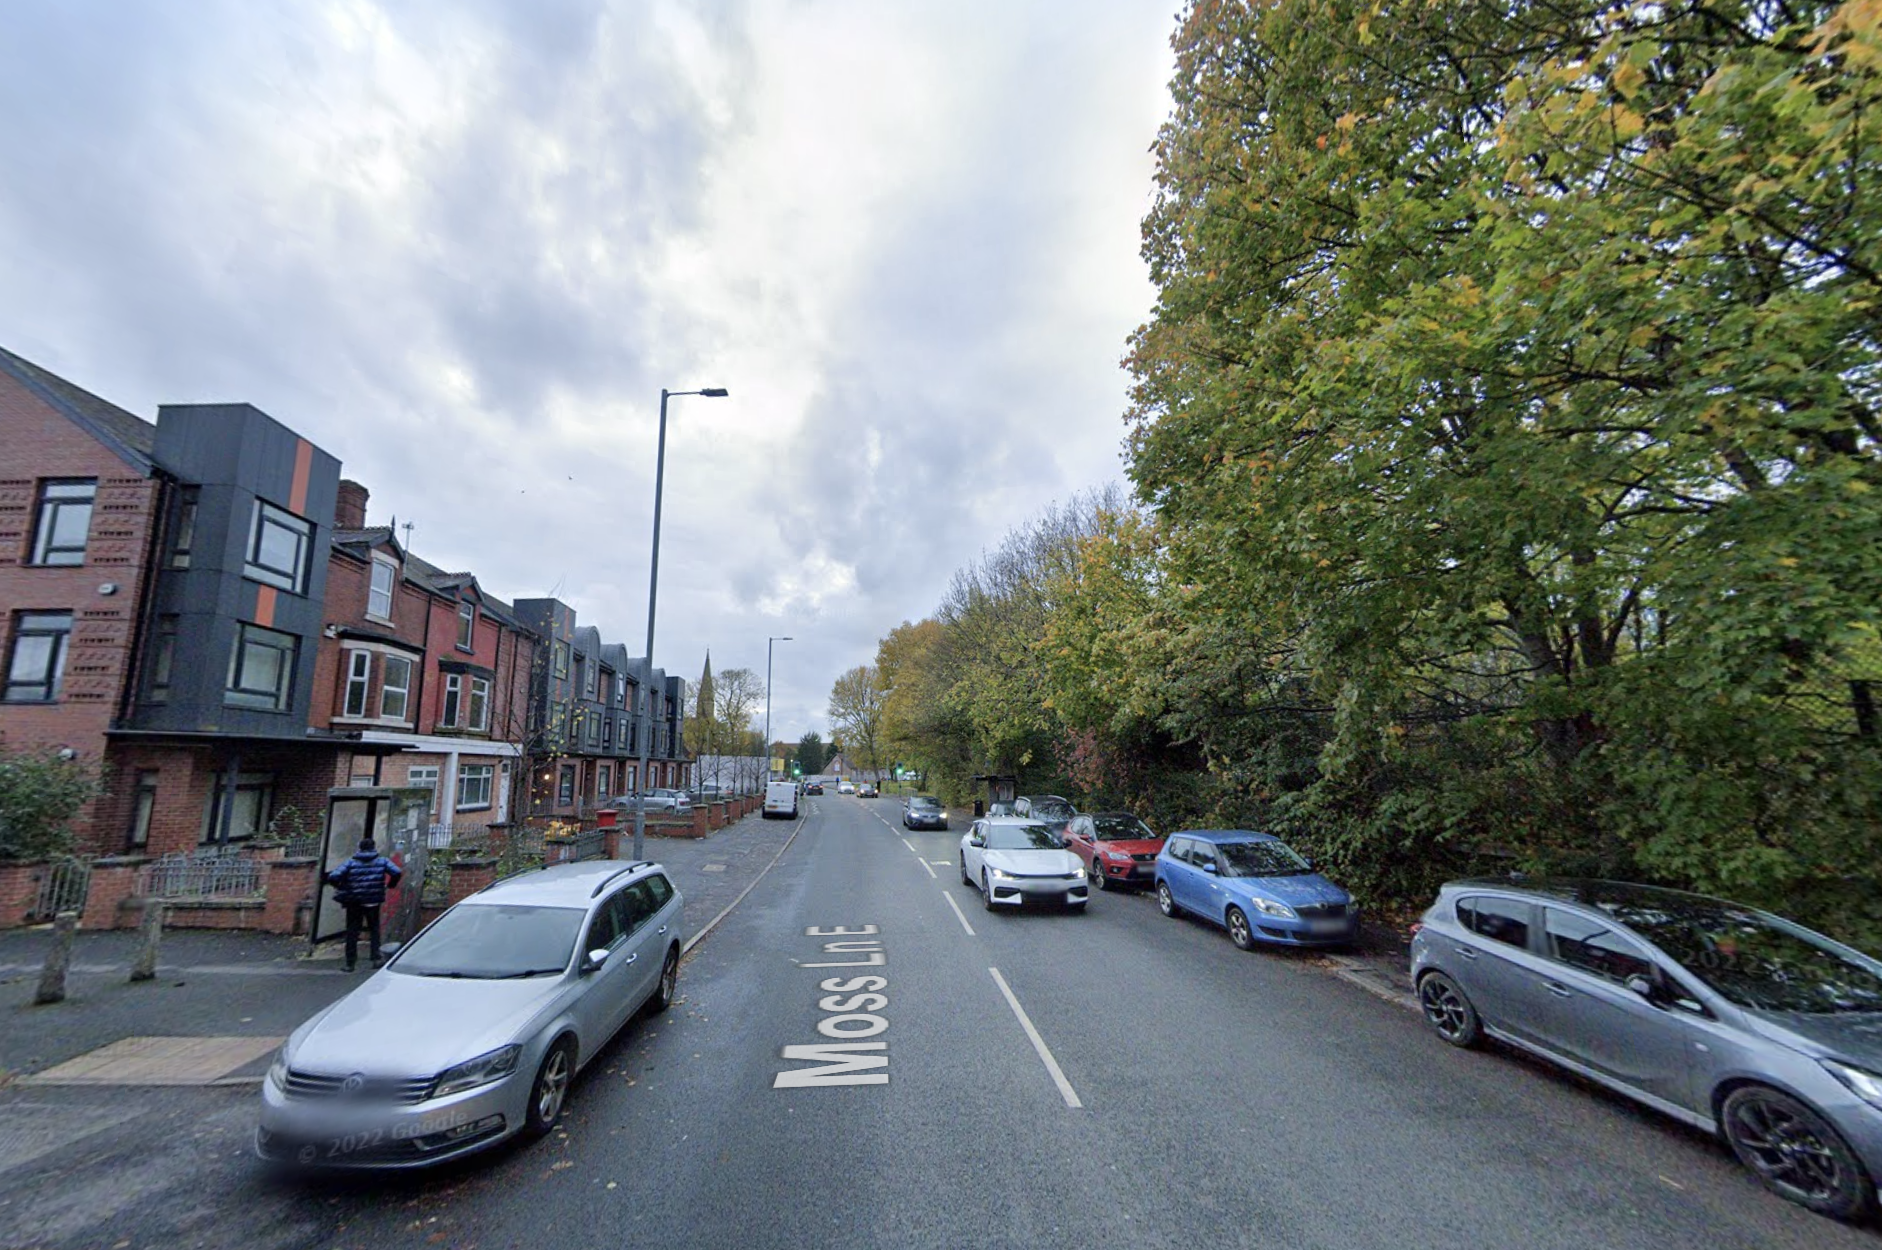 Police in Manchester have launched an appeal after a woman died in a horror crash on Moss Lane East